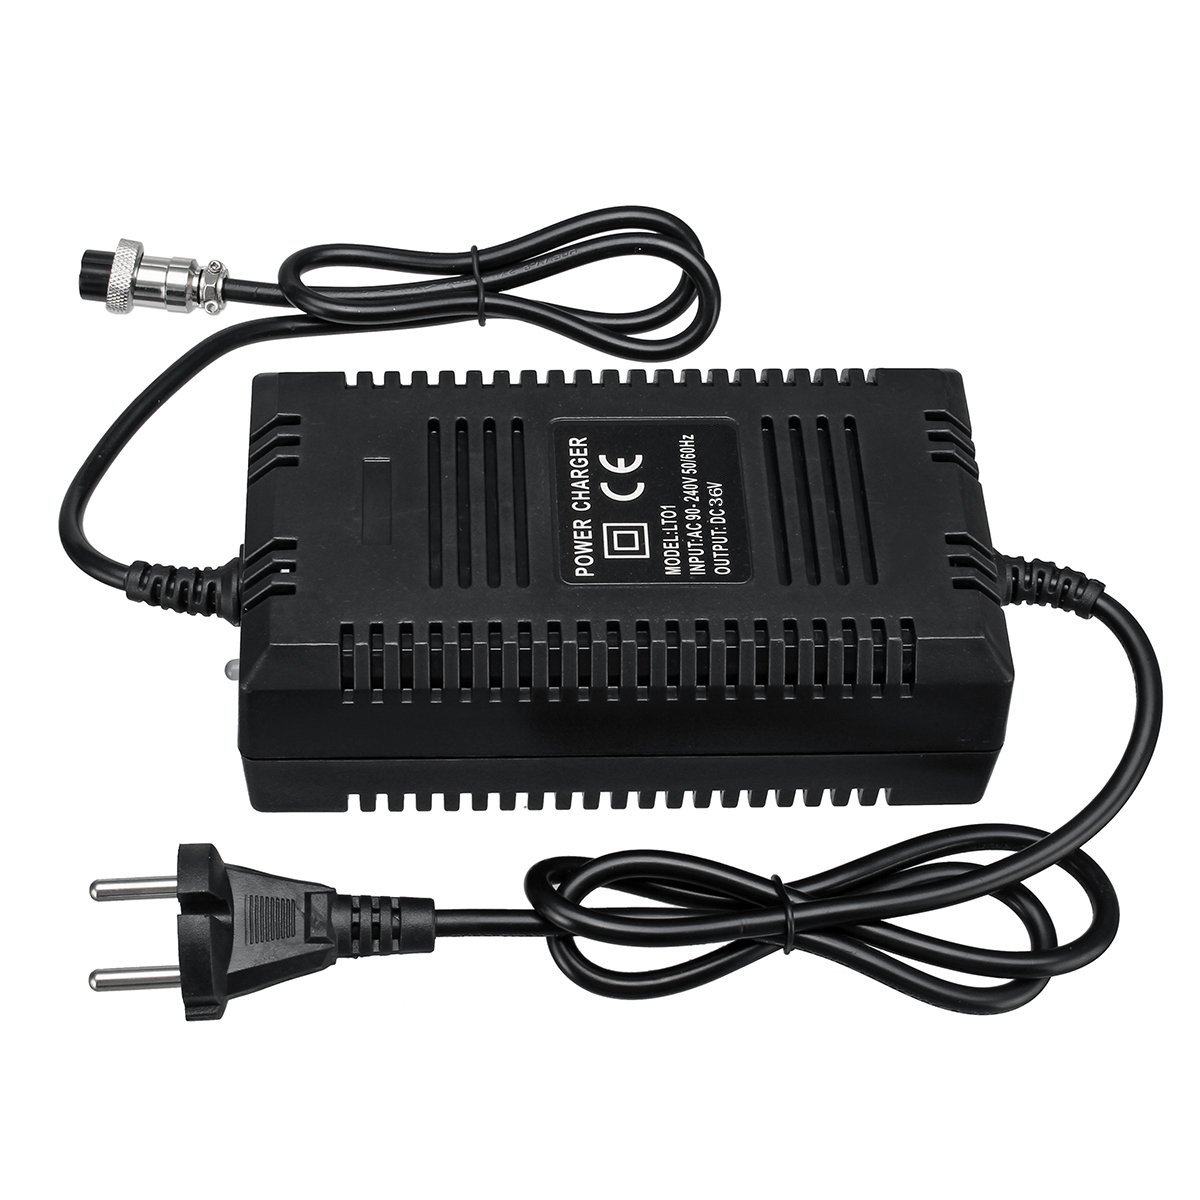 36V-18A-Lead-acid-Battery-Charger-Electric-Car-Vehicle-Scooter-Bicycle-Charger-1375553-5